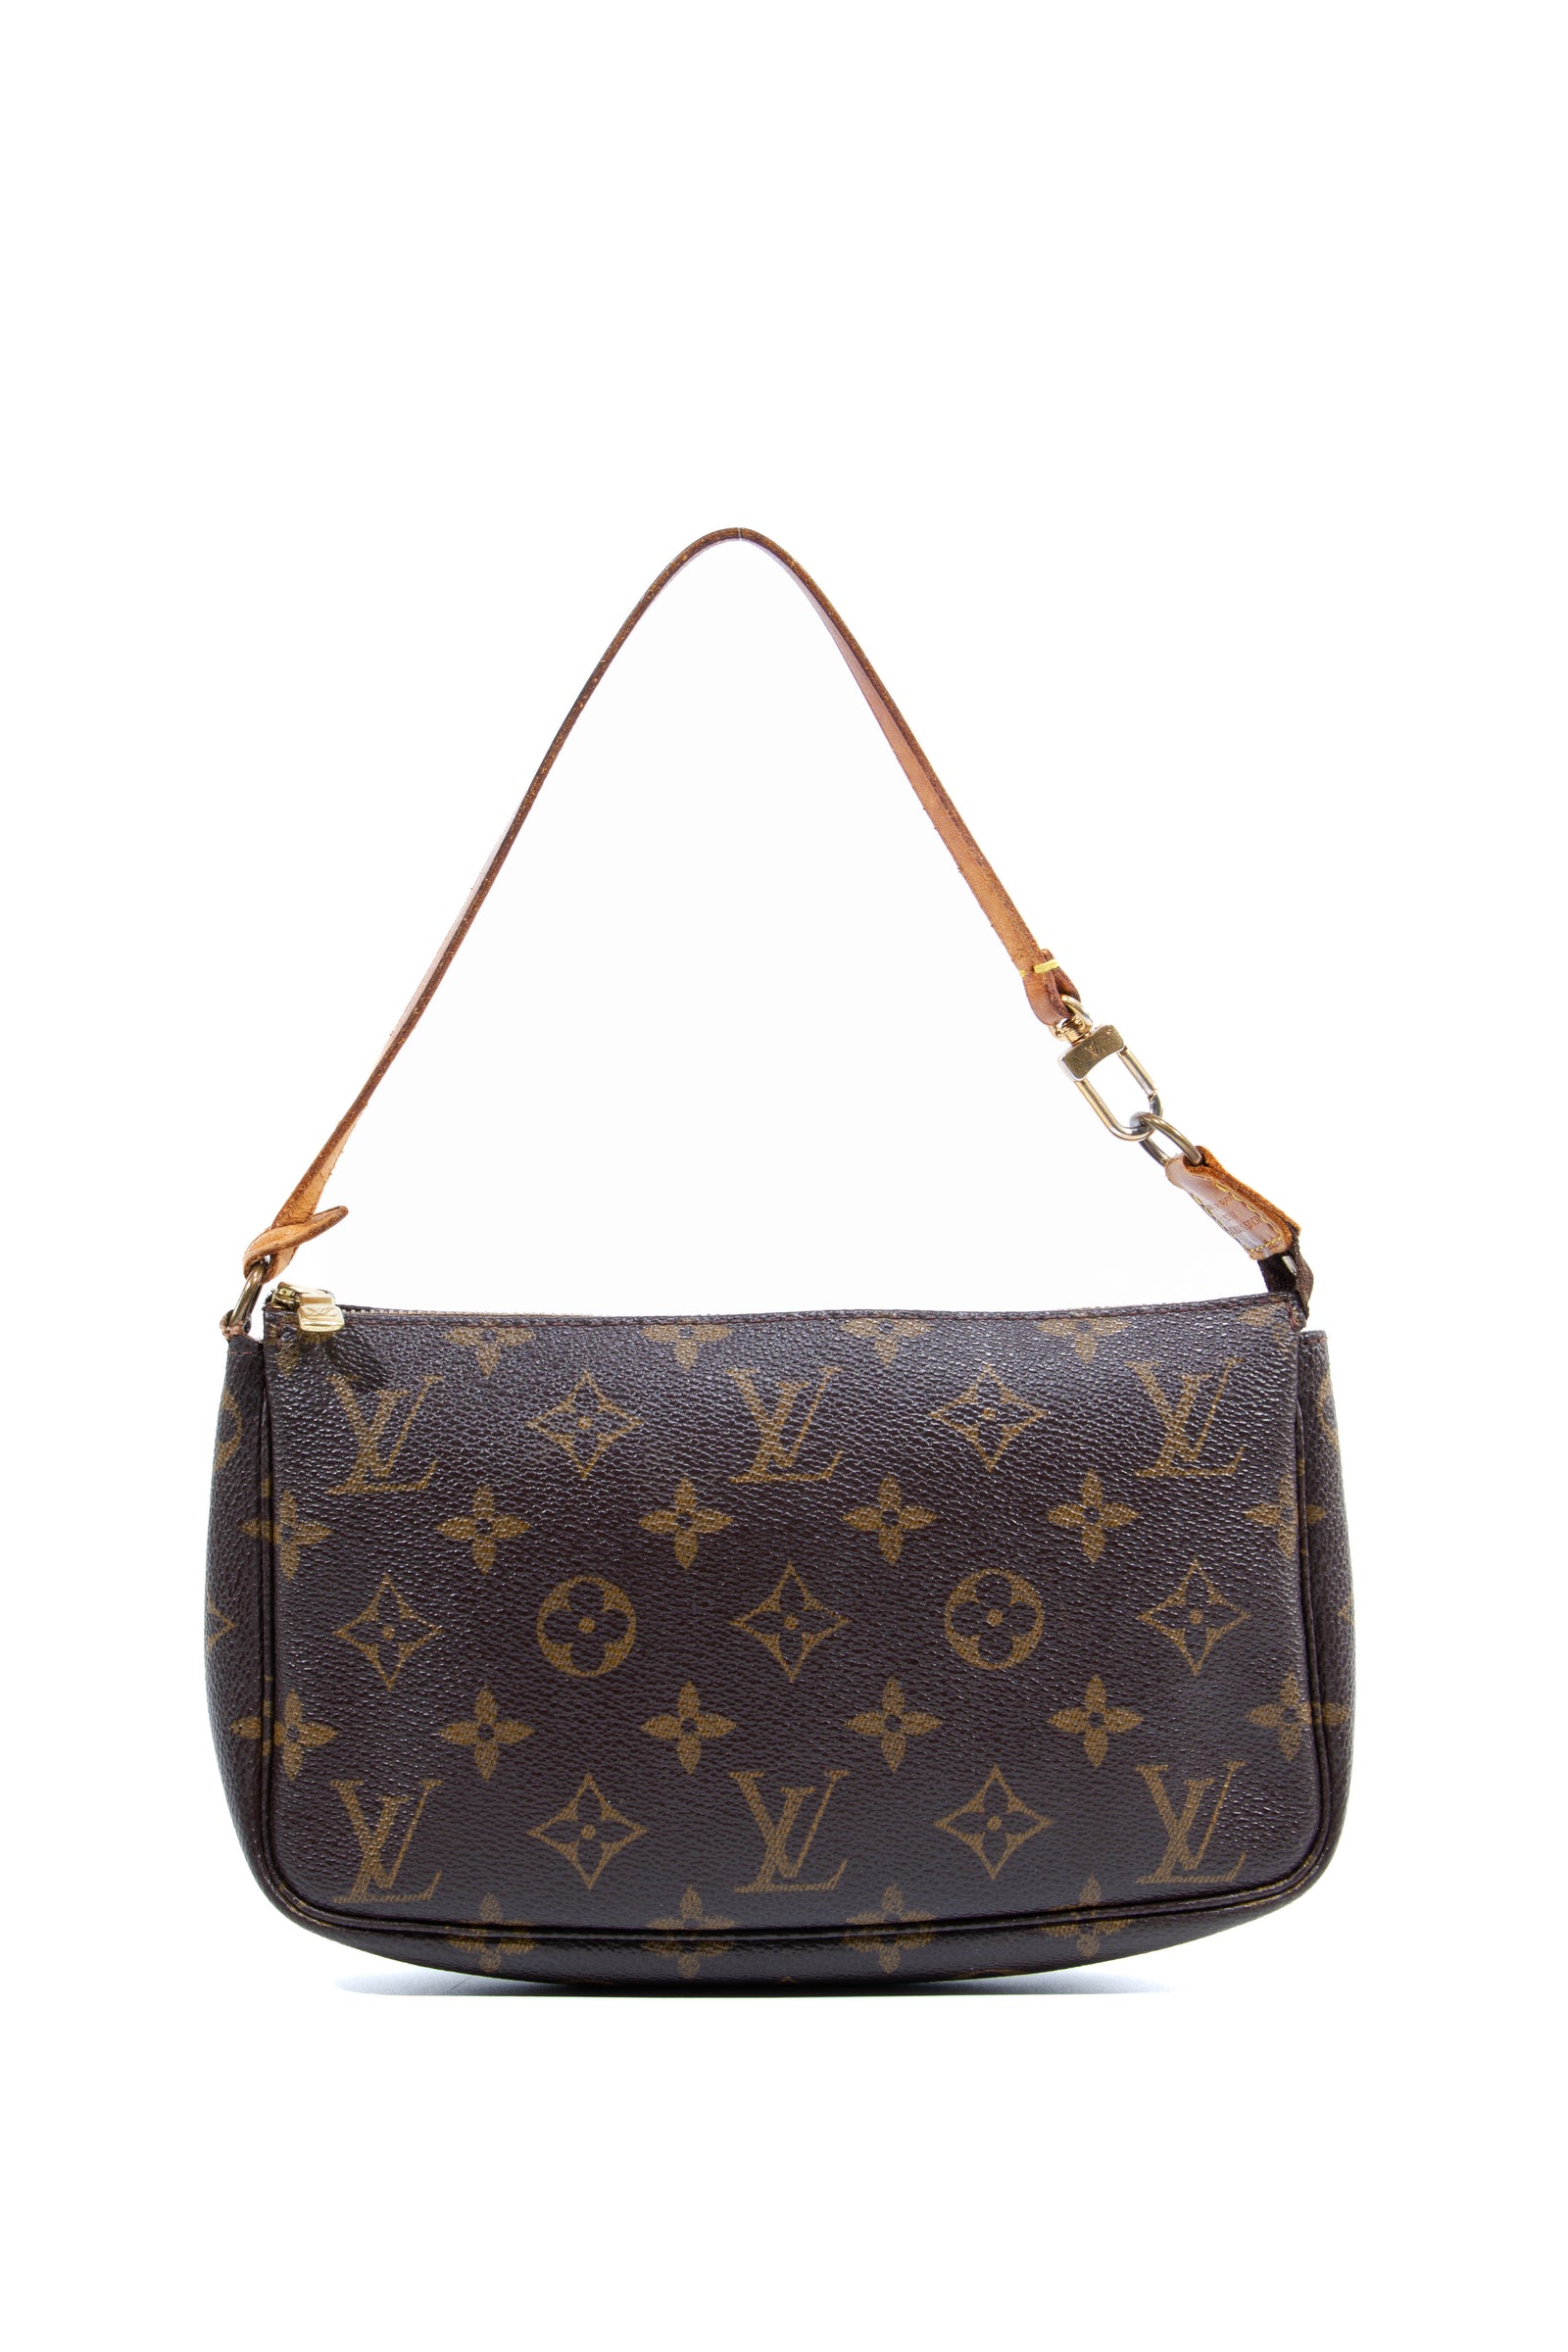 Louis Vuitton-Stephen Sprouse Bag Limited Edition North South In